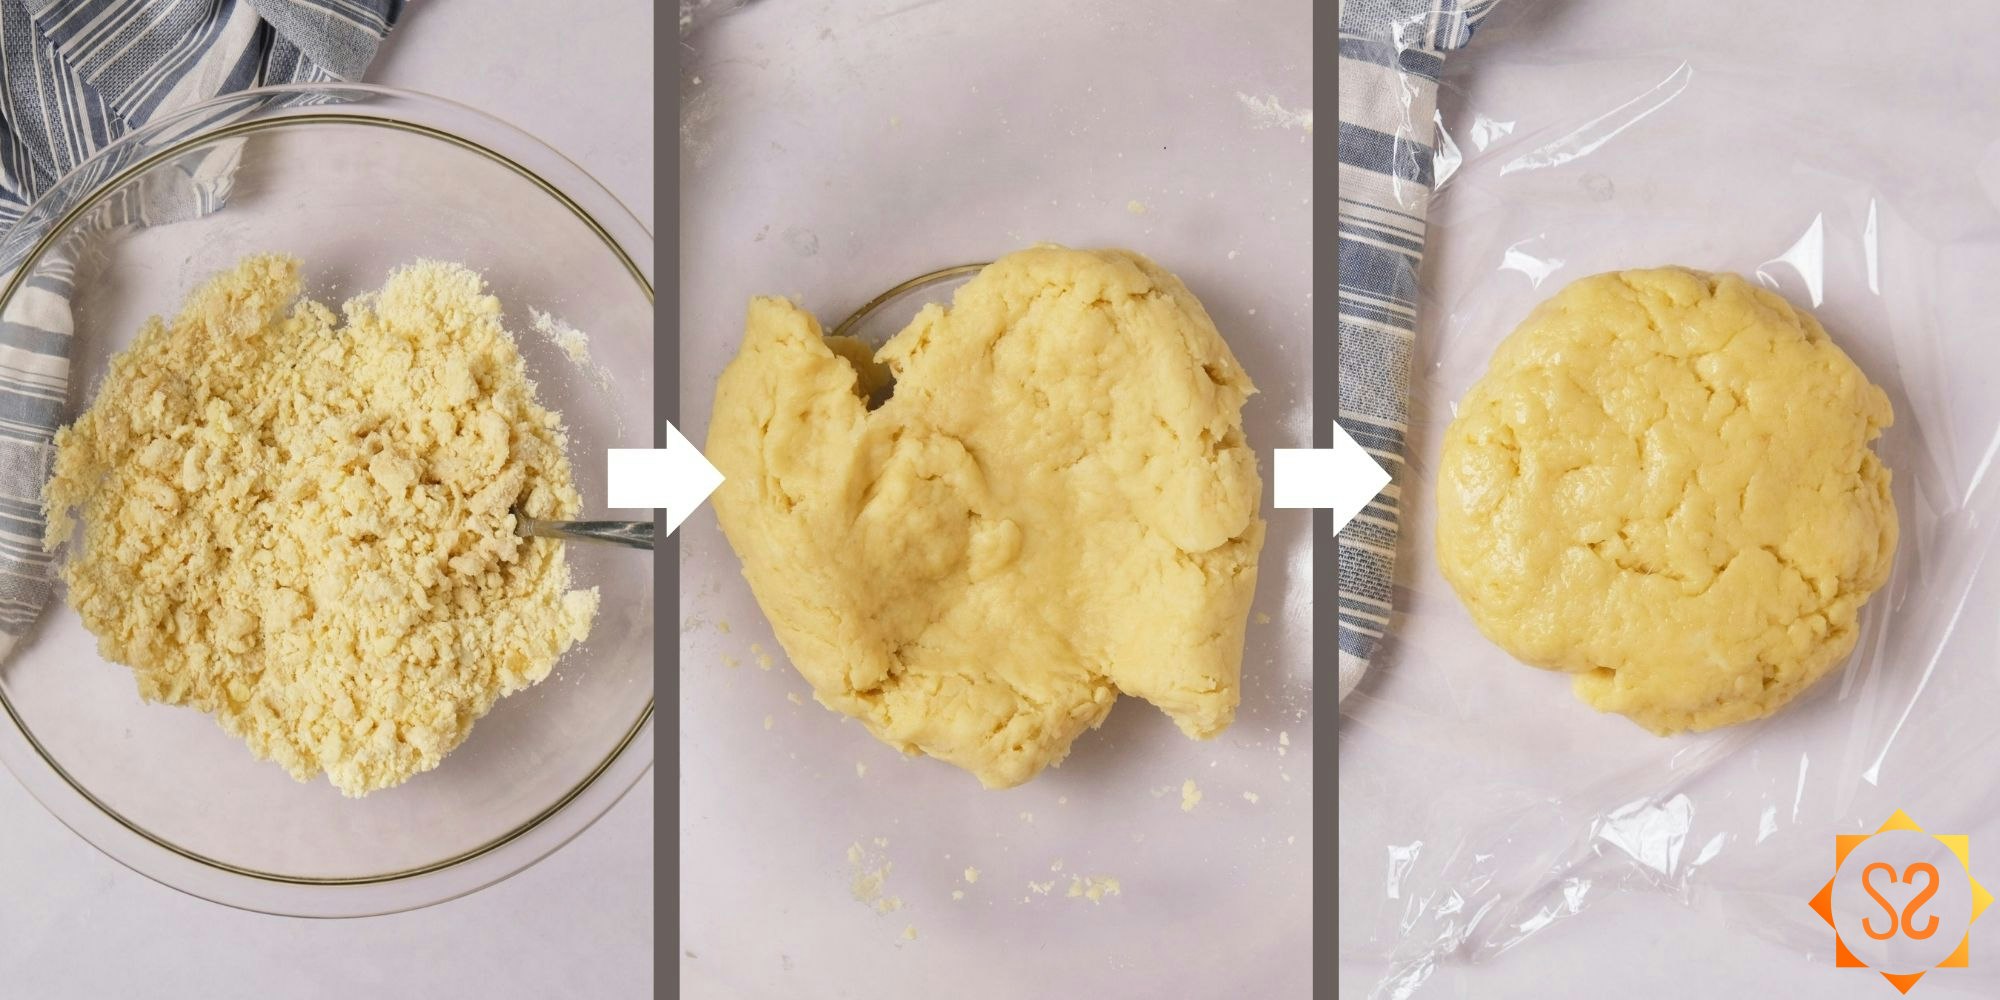 Three images, first image: all ingredients mixed together in a bowl, second image: all ingredients forming a dough ball, third image: dough flattened into a disc and placed on plastic wrap.